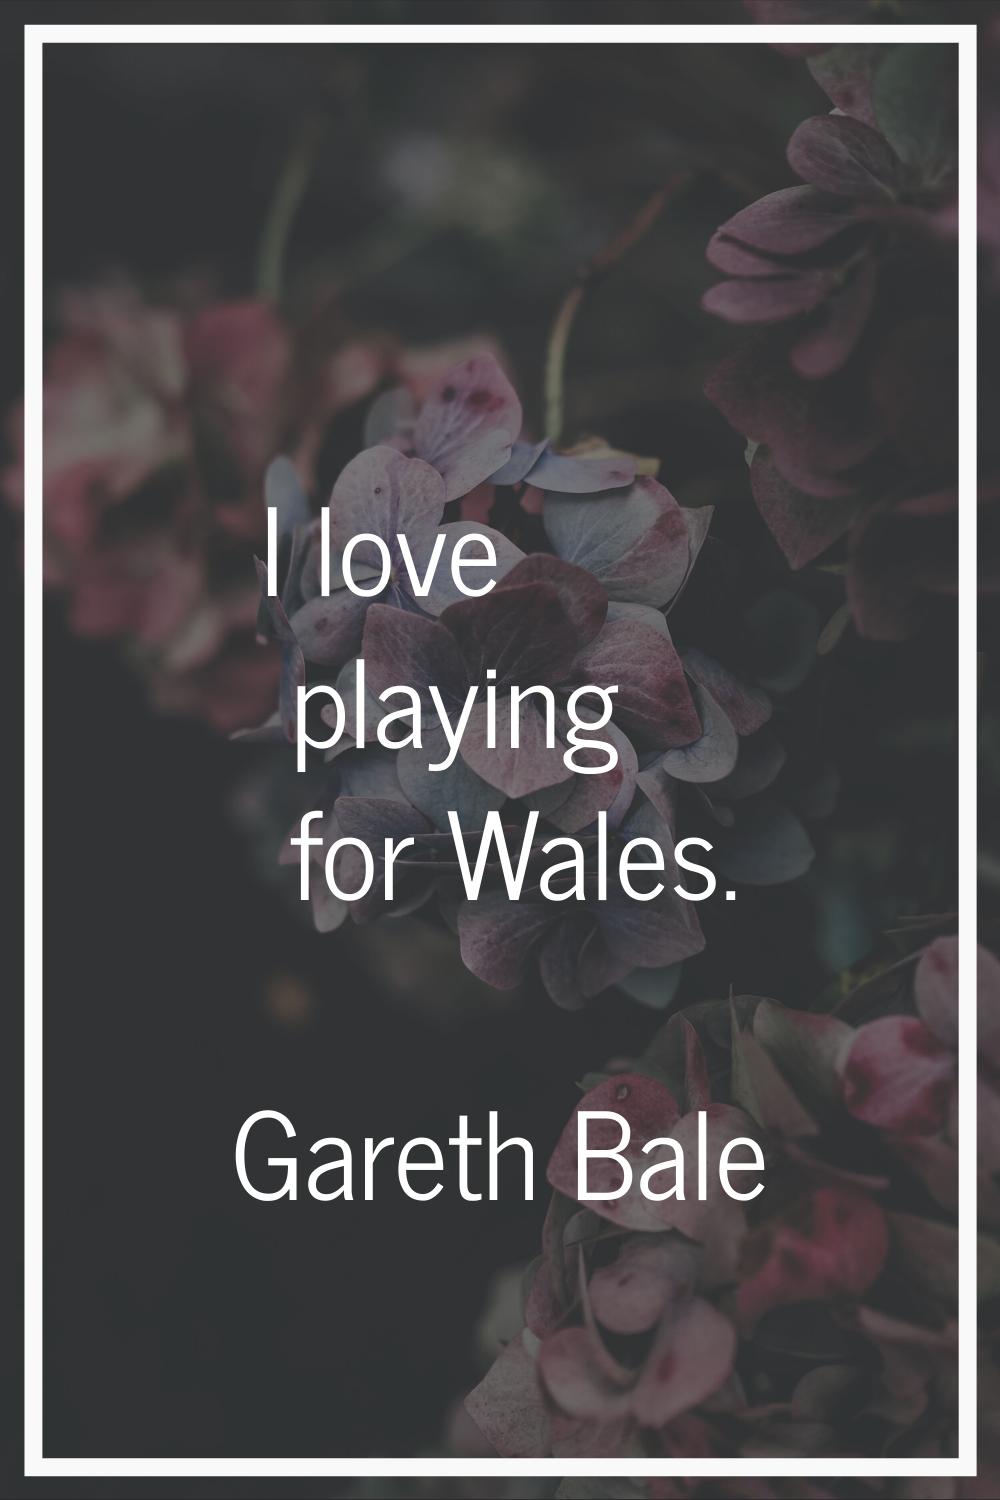 I love playing for Wales.